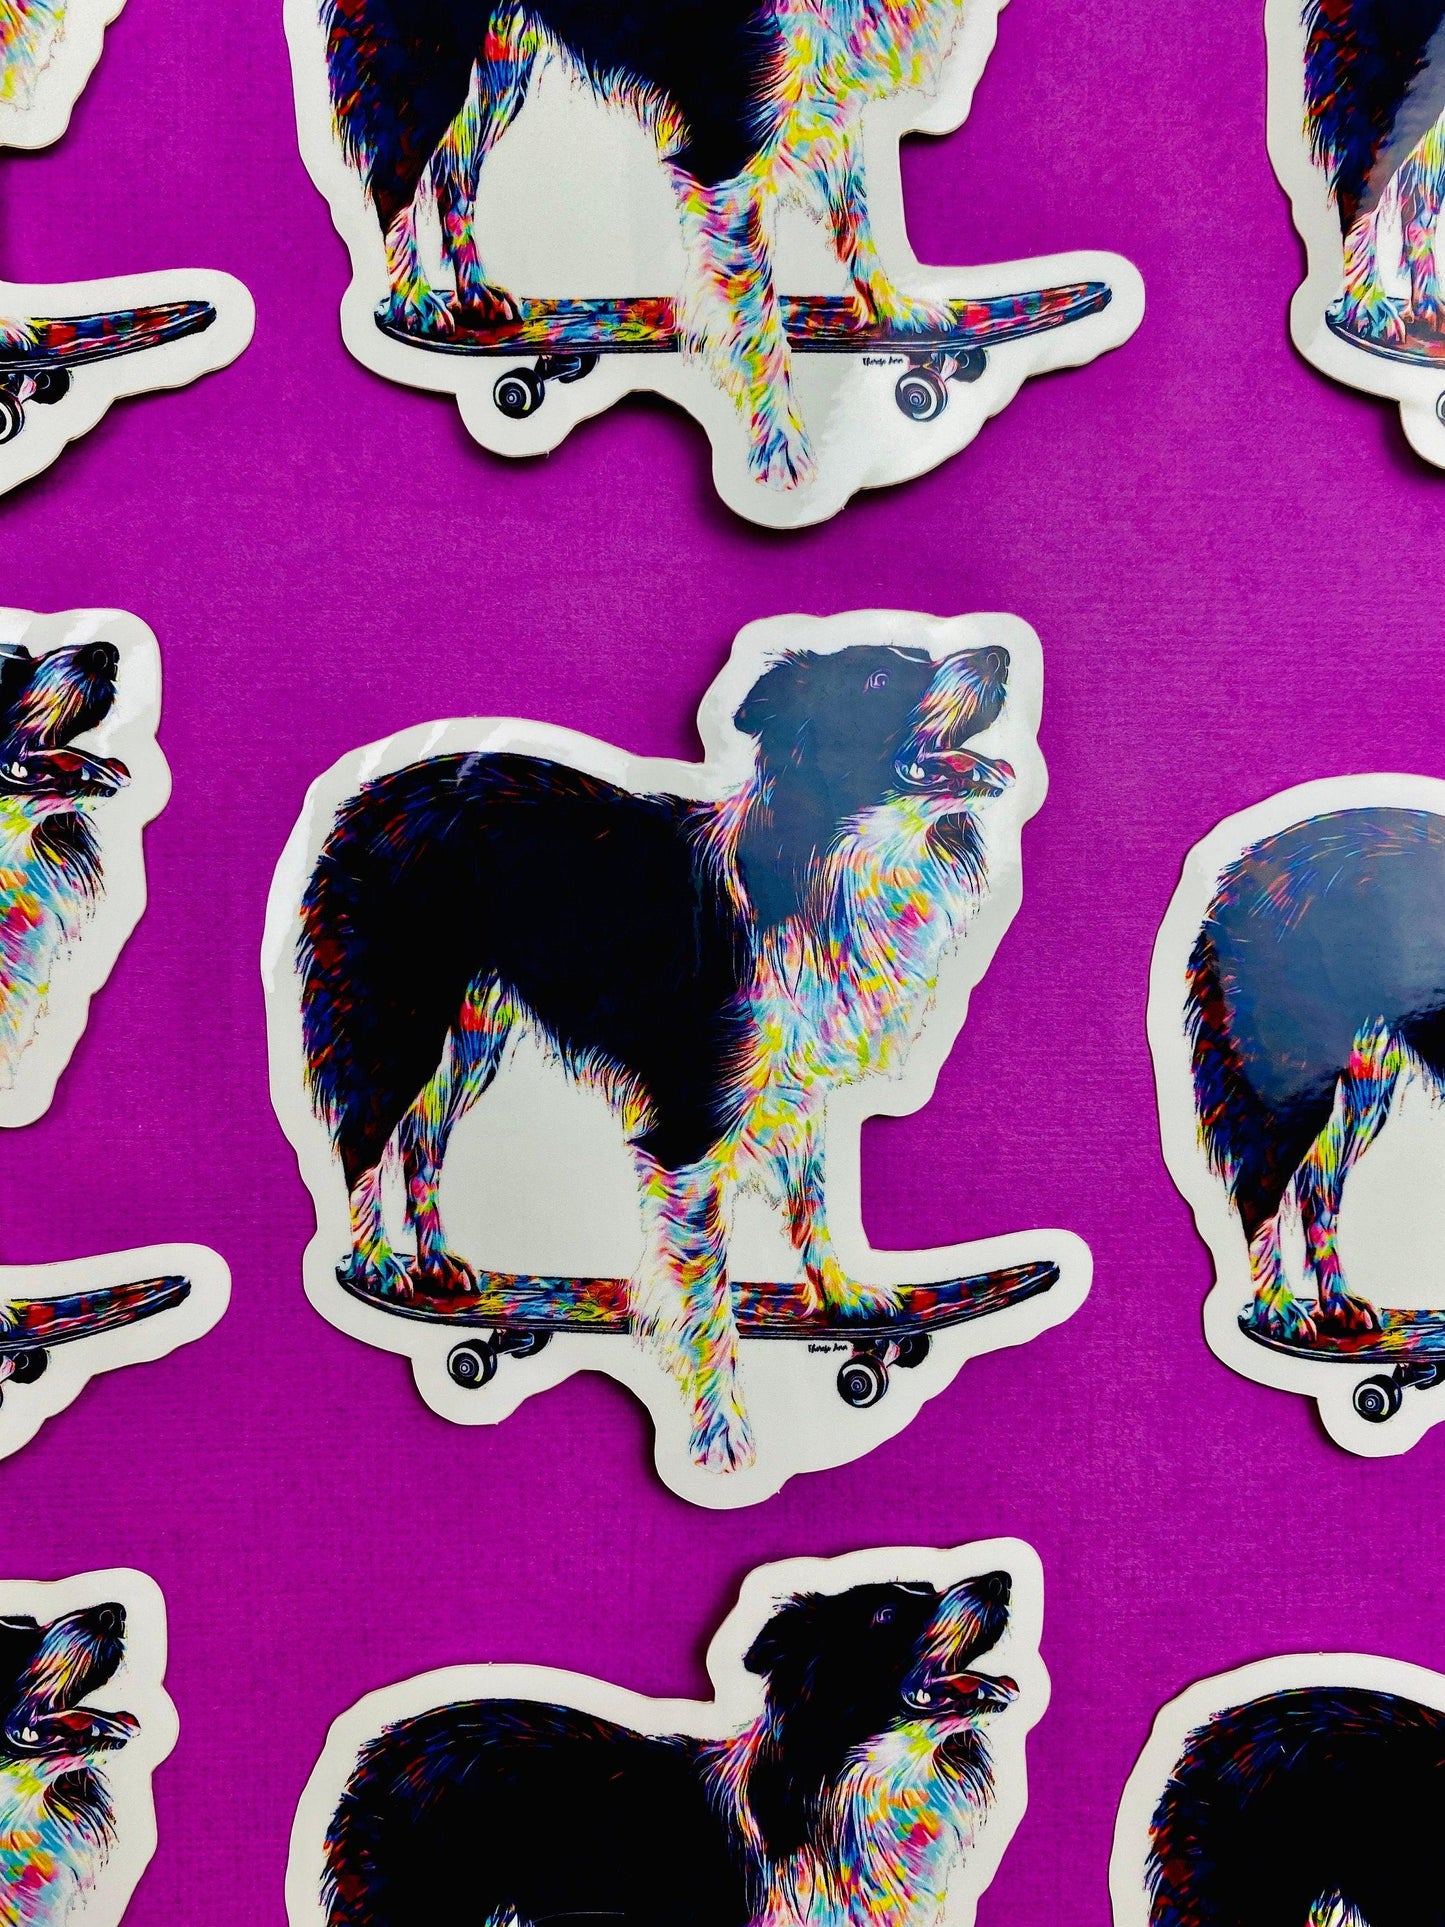 Border Collie Skateboard Sticker Colorful Abstract Cute Border Collie Dog Decal for Car, Hydroflask, Fun Border Collie on a Skateboard Art - Ottos Grotto :: Stickers For Your Stuff